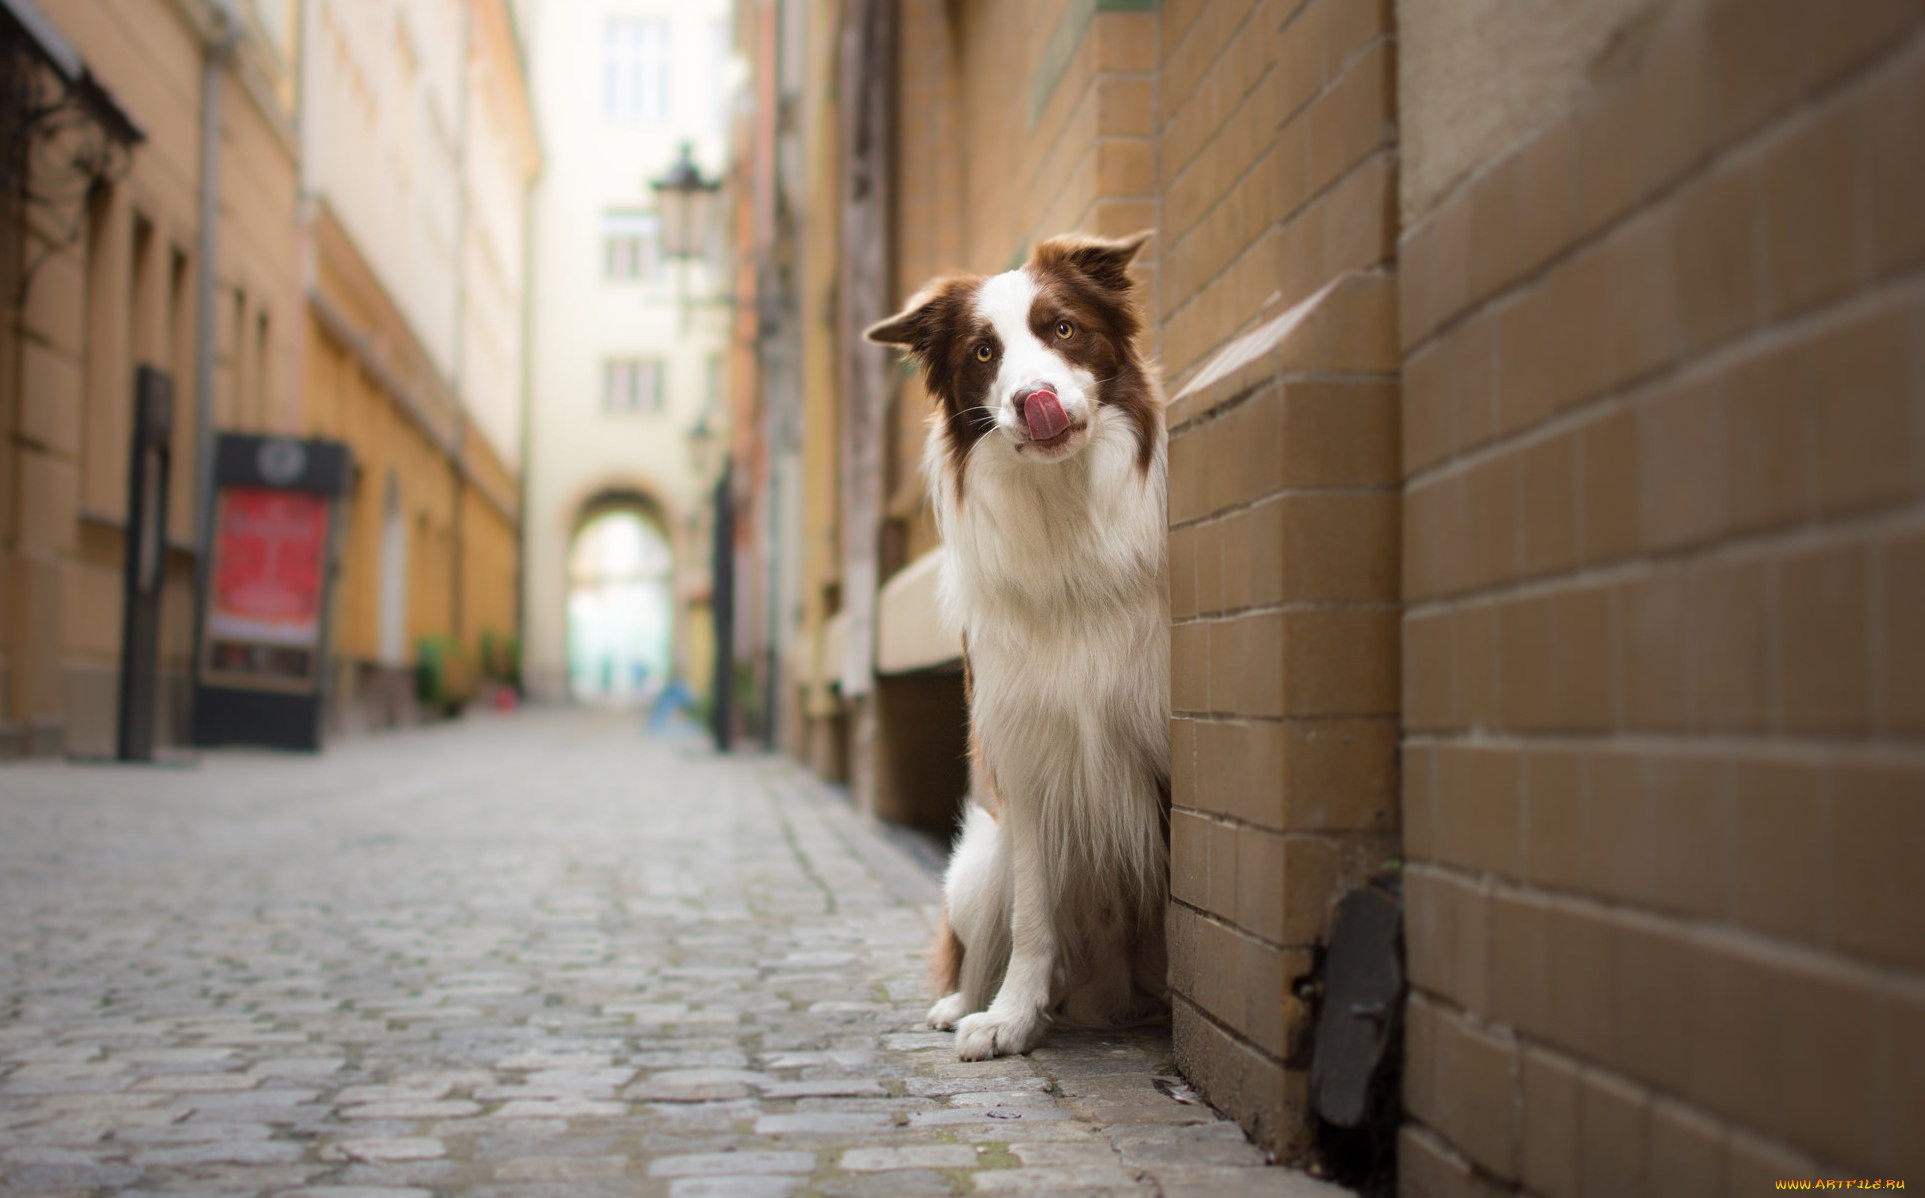 , , townhouses, border, collie, street, dog, -, look